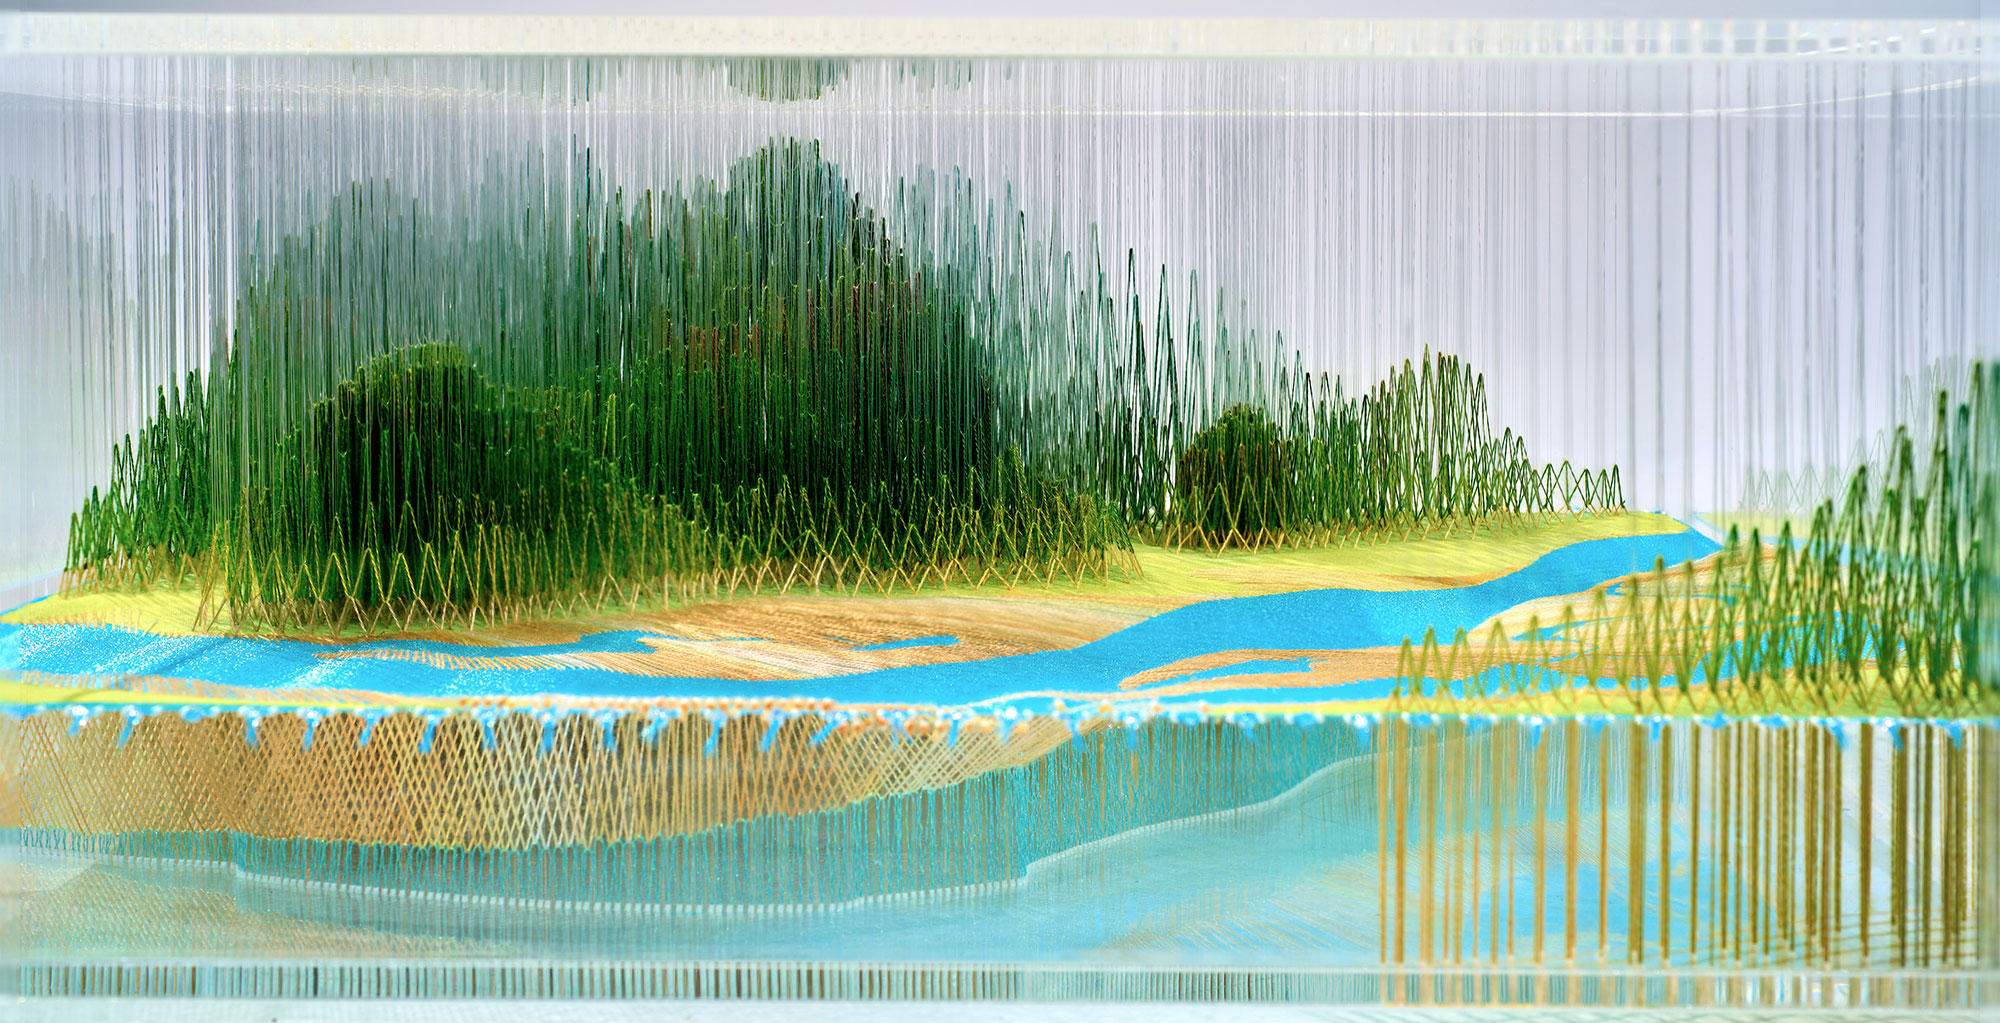 Isobel Currie, Interlaced and Fly Stitch Estuary